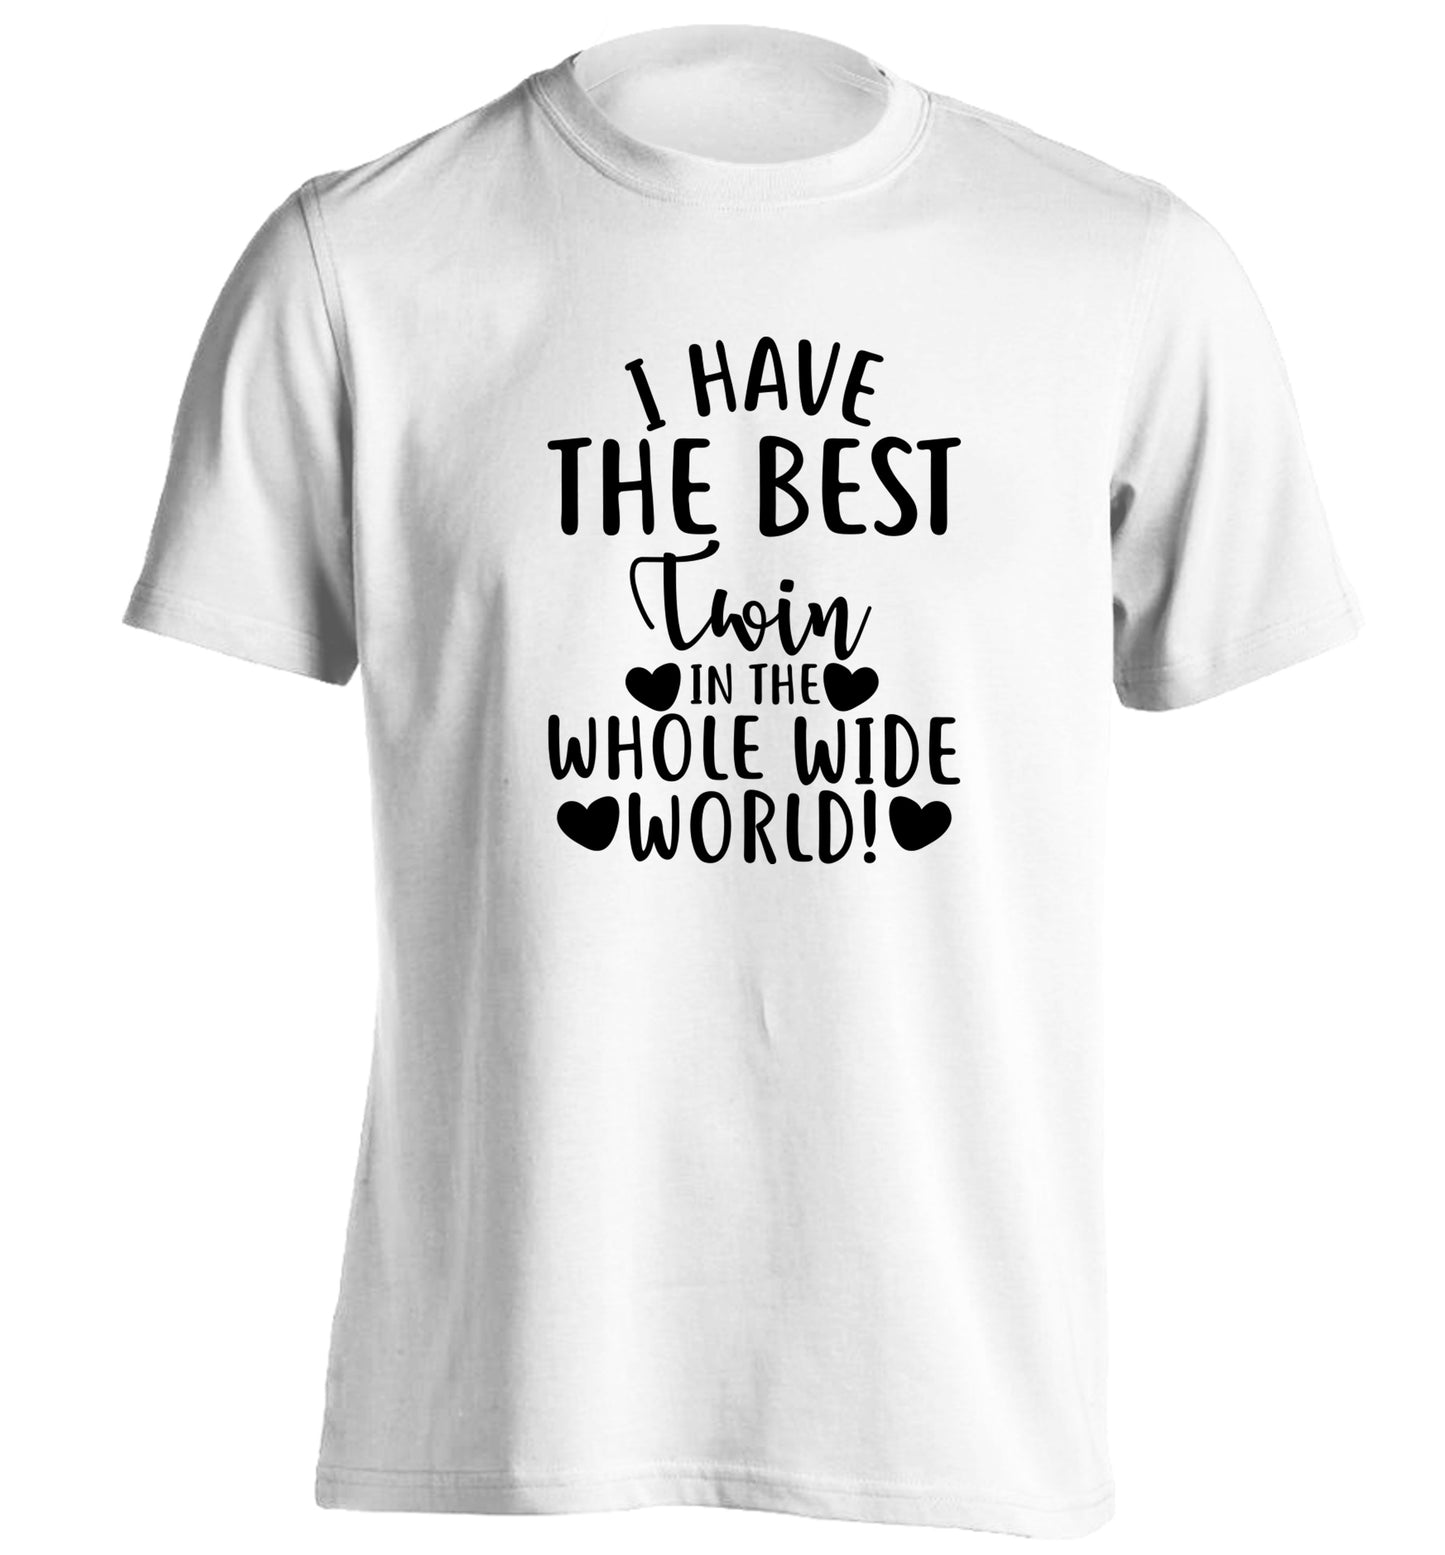 I have the best twin in the whole wide world! adults unisex white Tshirt 2XL